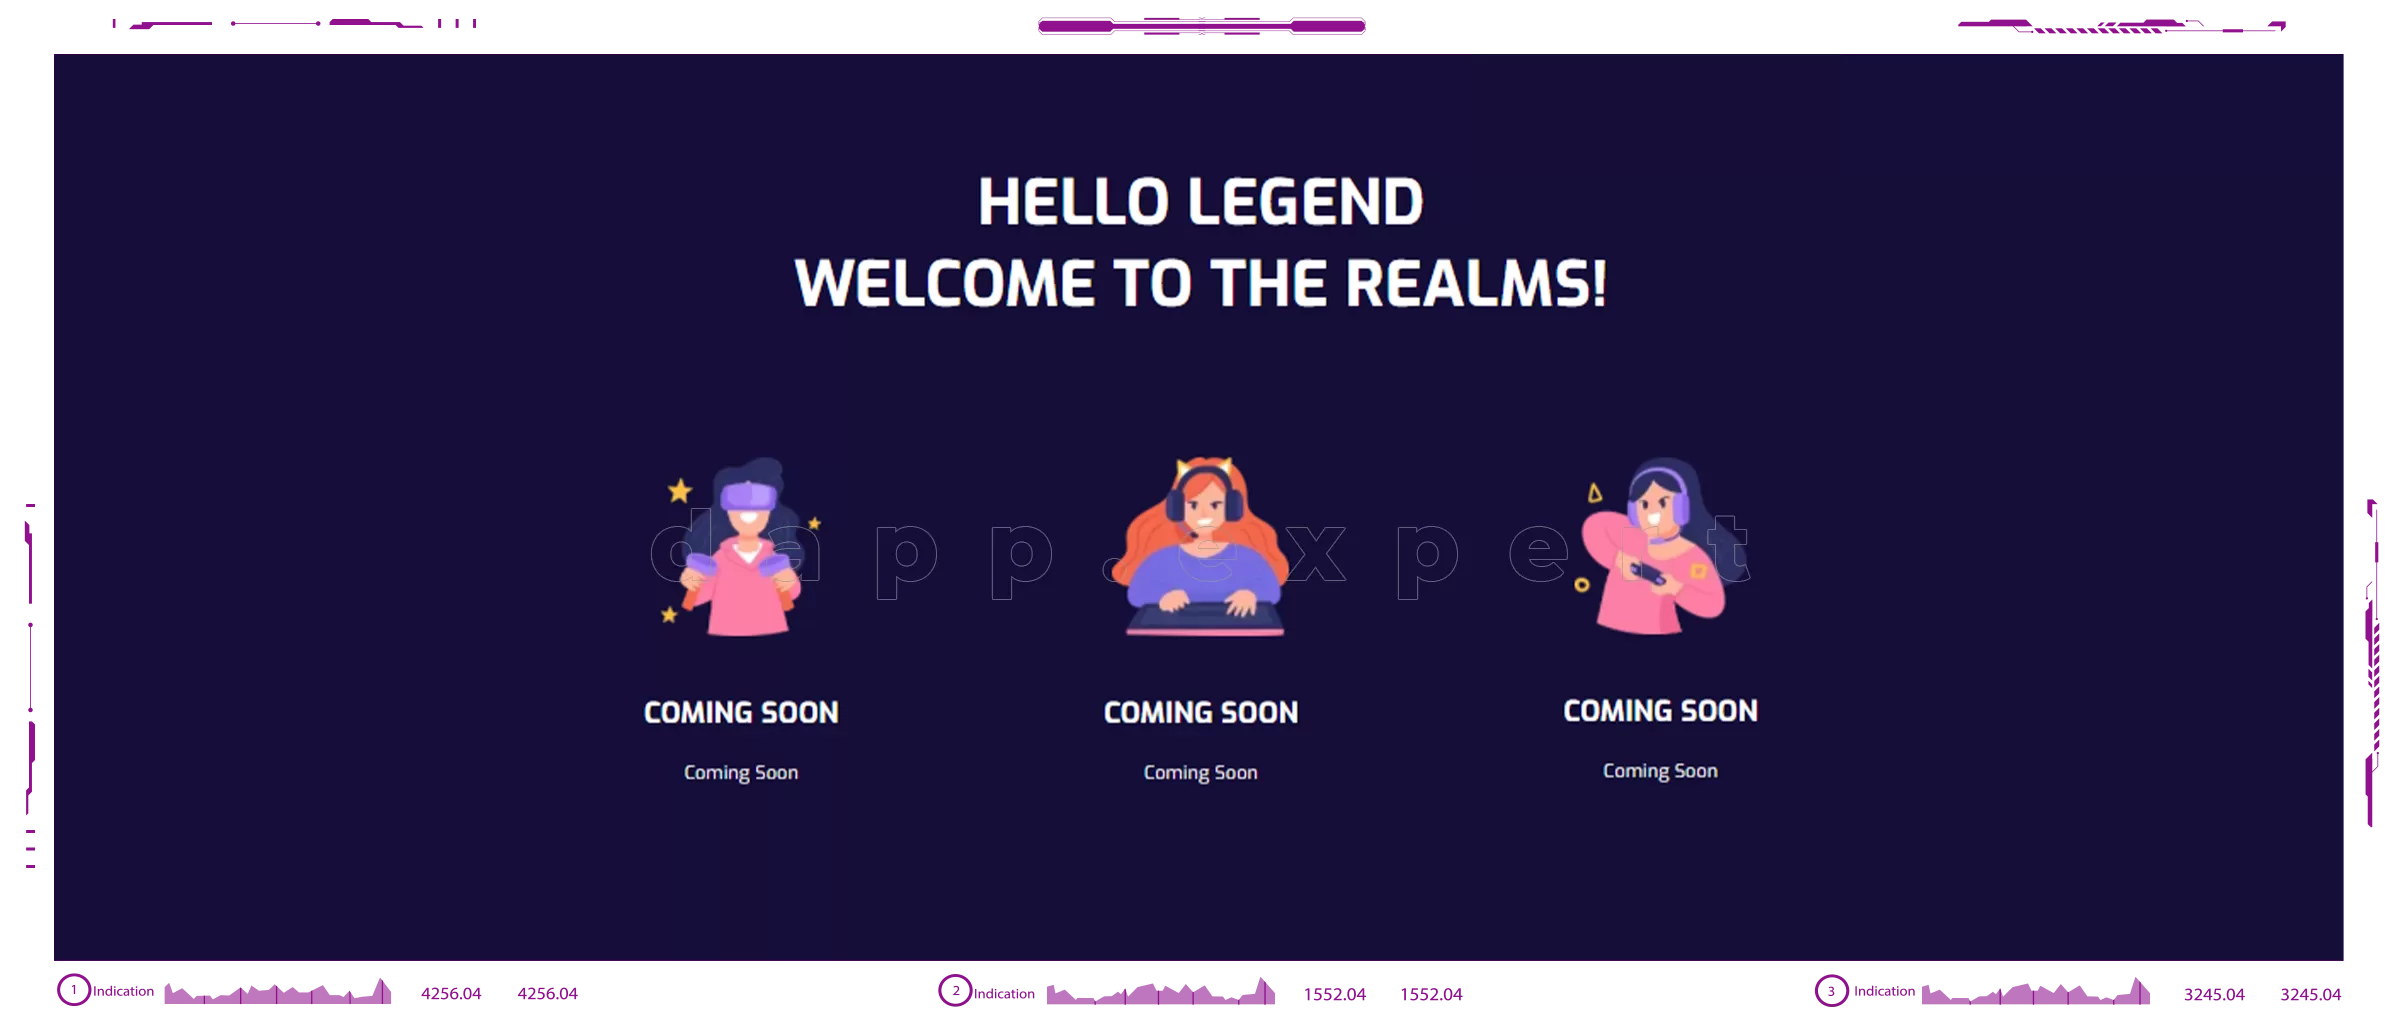 The Realms dapps